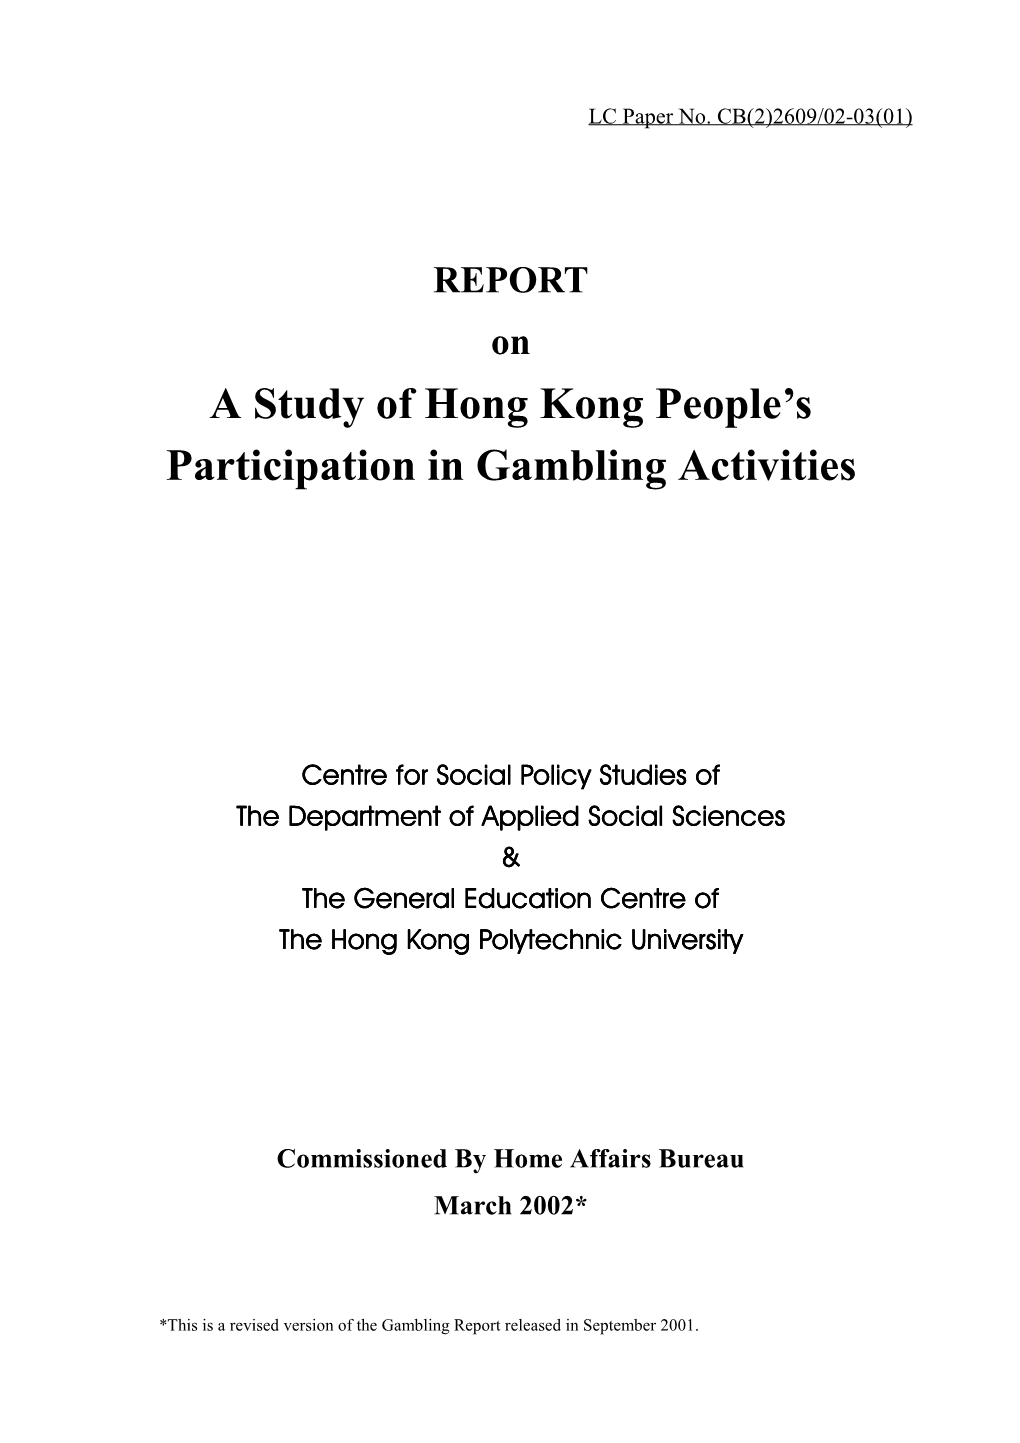 A Study of Hong Kong People's Participation in Gambling Activities